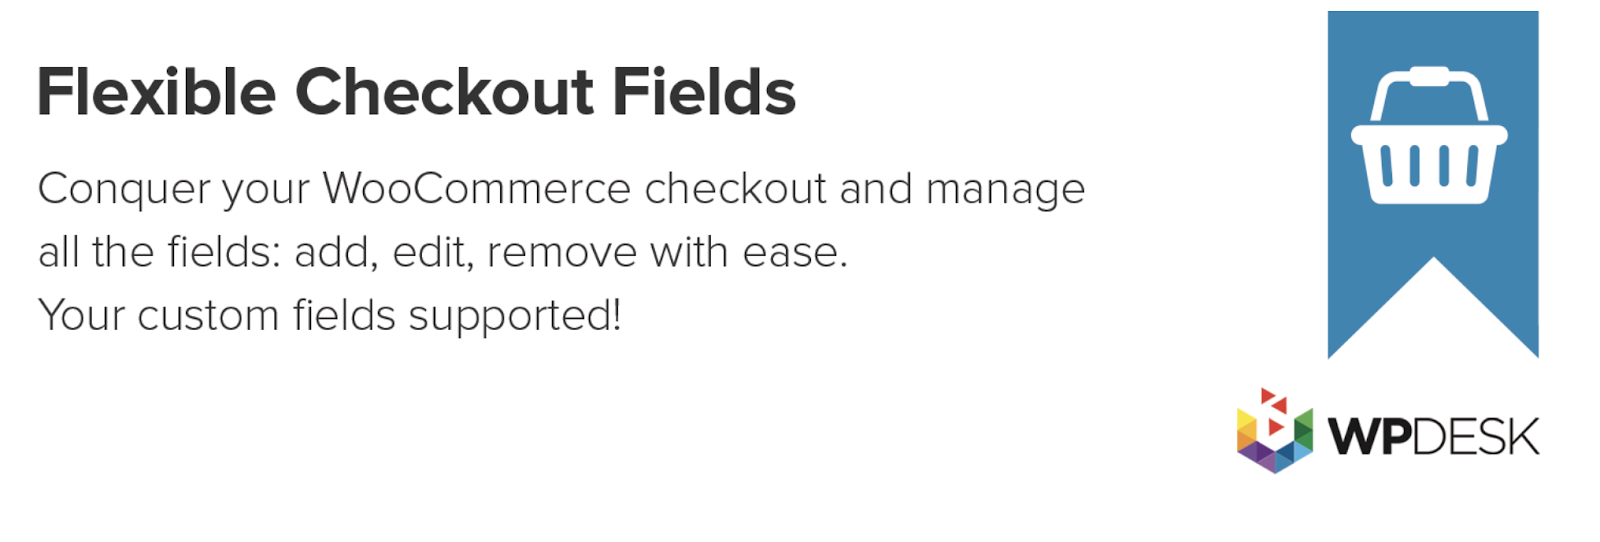 flexible checkout fields for woocommerce